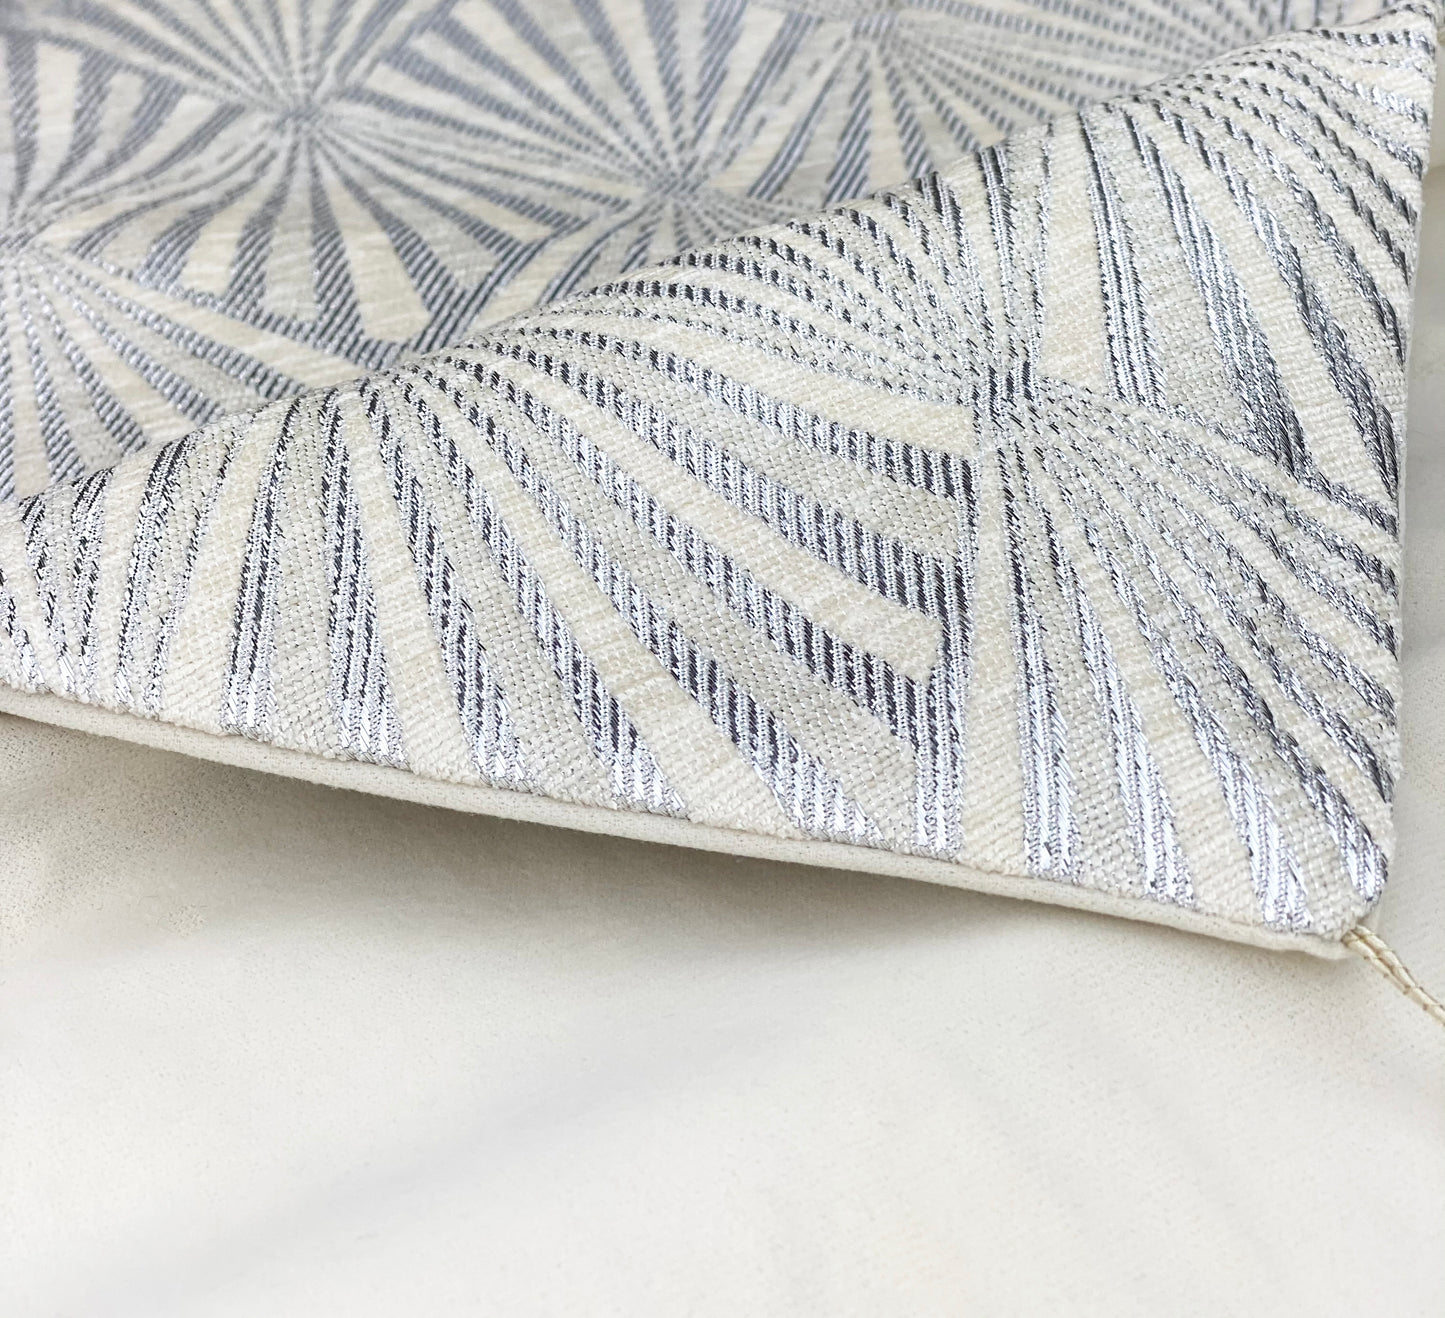 Table Runner with Geometric Striped Design, 14" x 90", ivory, Washable table runner for fall dining table